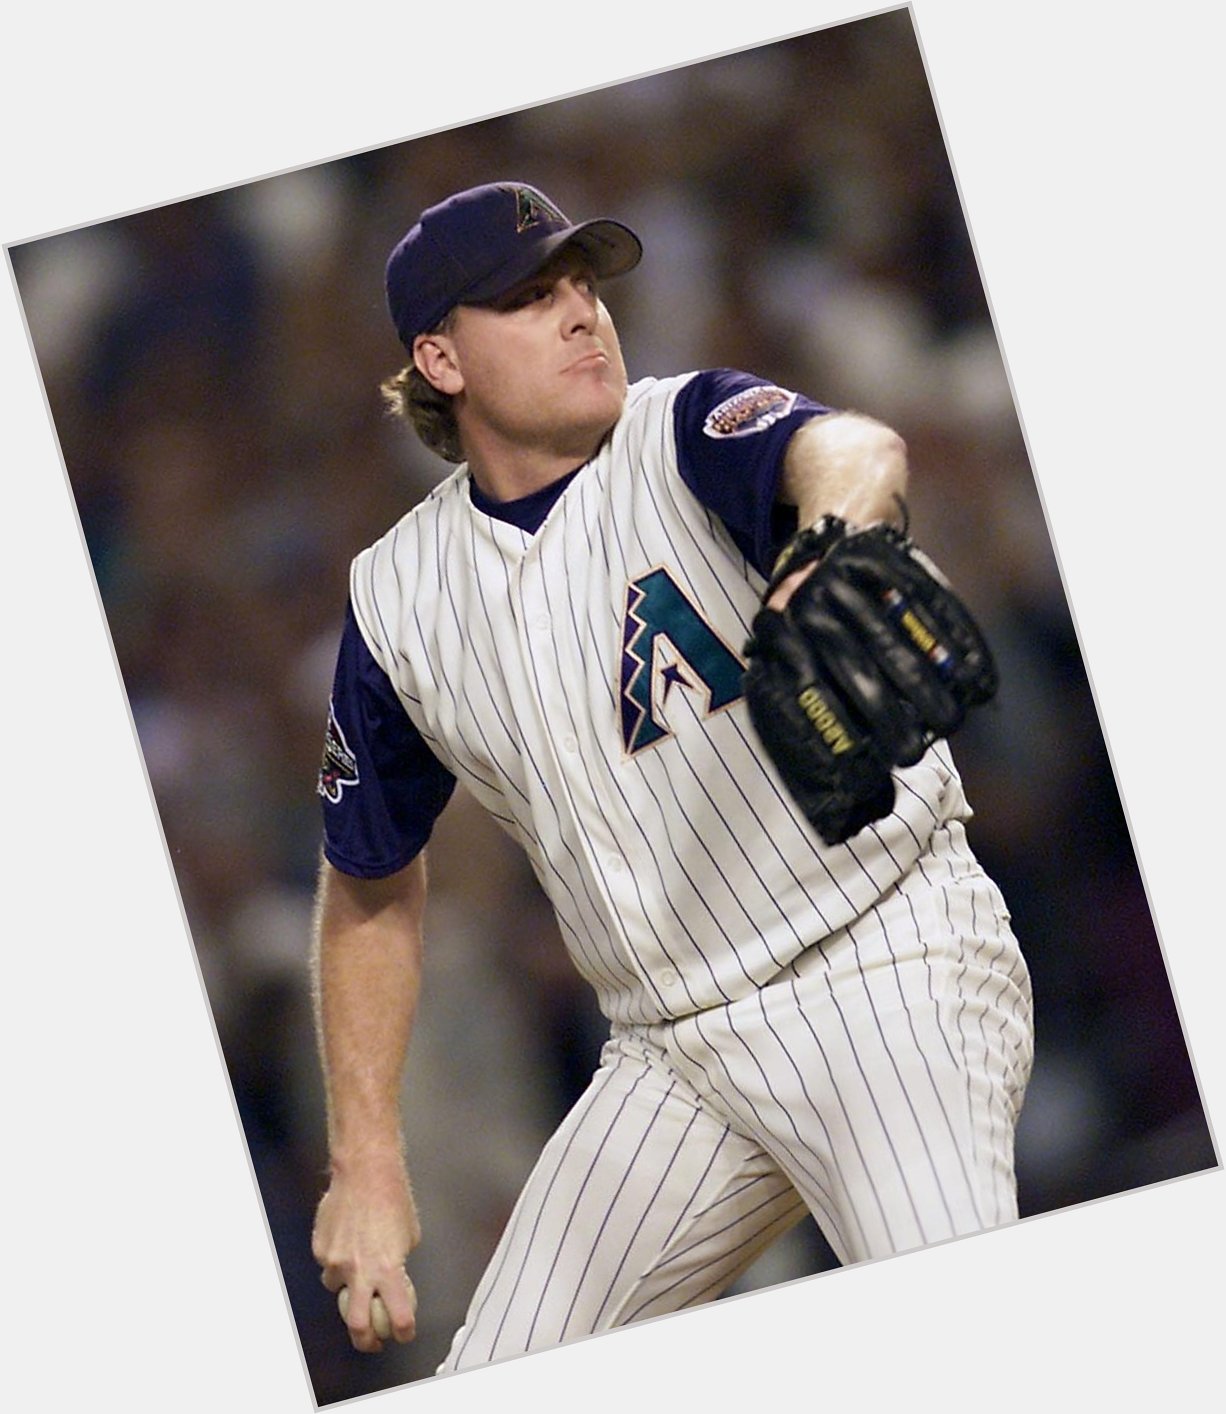 Happy 48th birthday to Curt Schilling, who evolved from an erratic young pitcher into the pitcher by Hall Rating. 